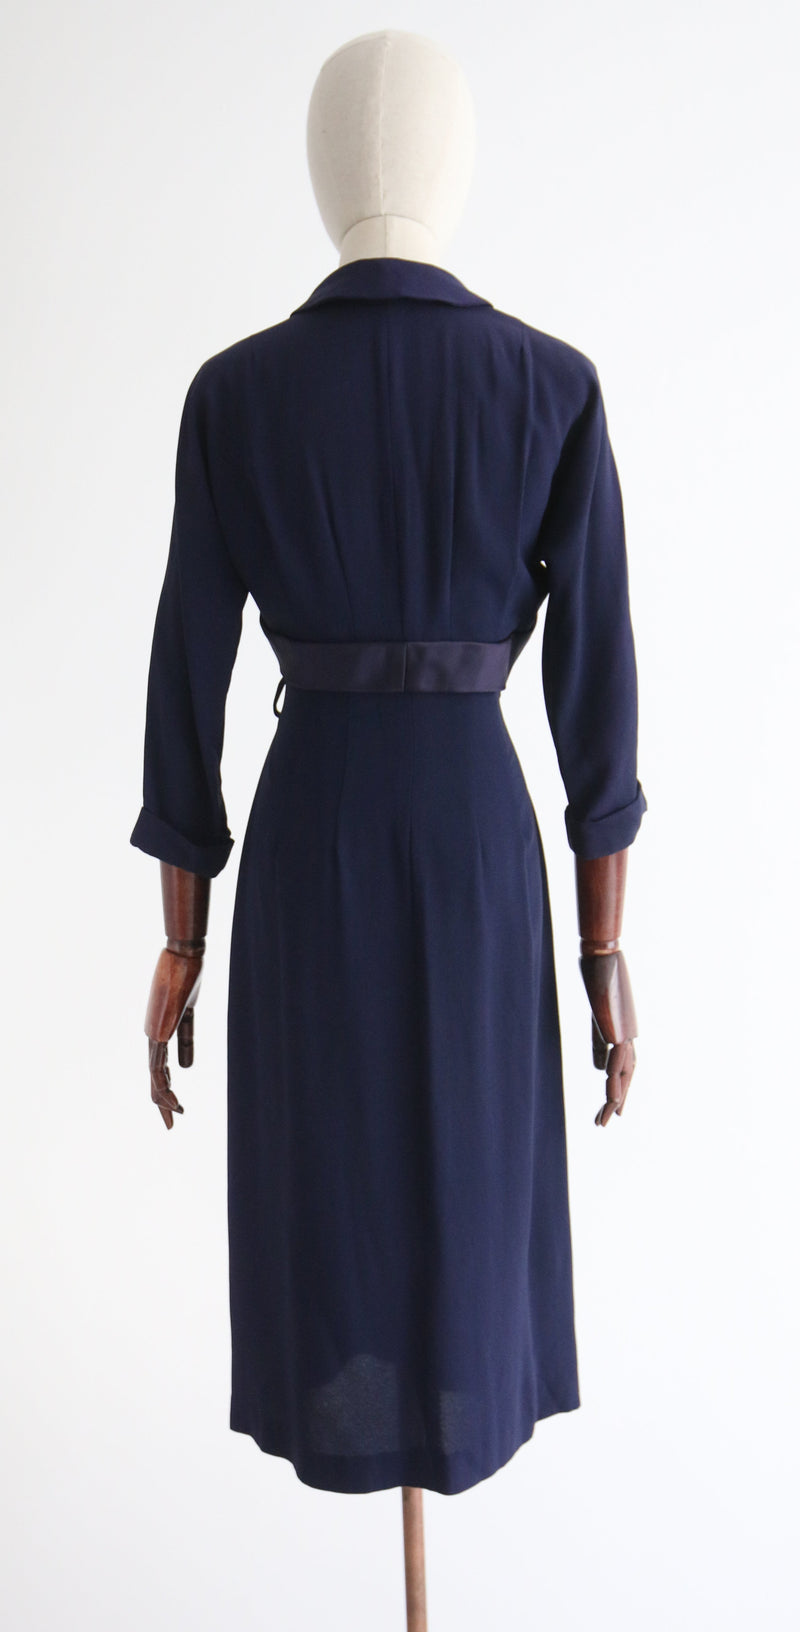 "Navy Ribbon & Tailoring" Vintage 1940's Navy Blue Fitted Dress UK 10 US 6